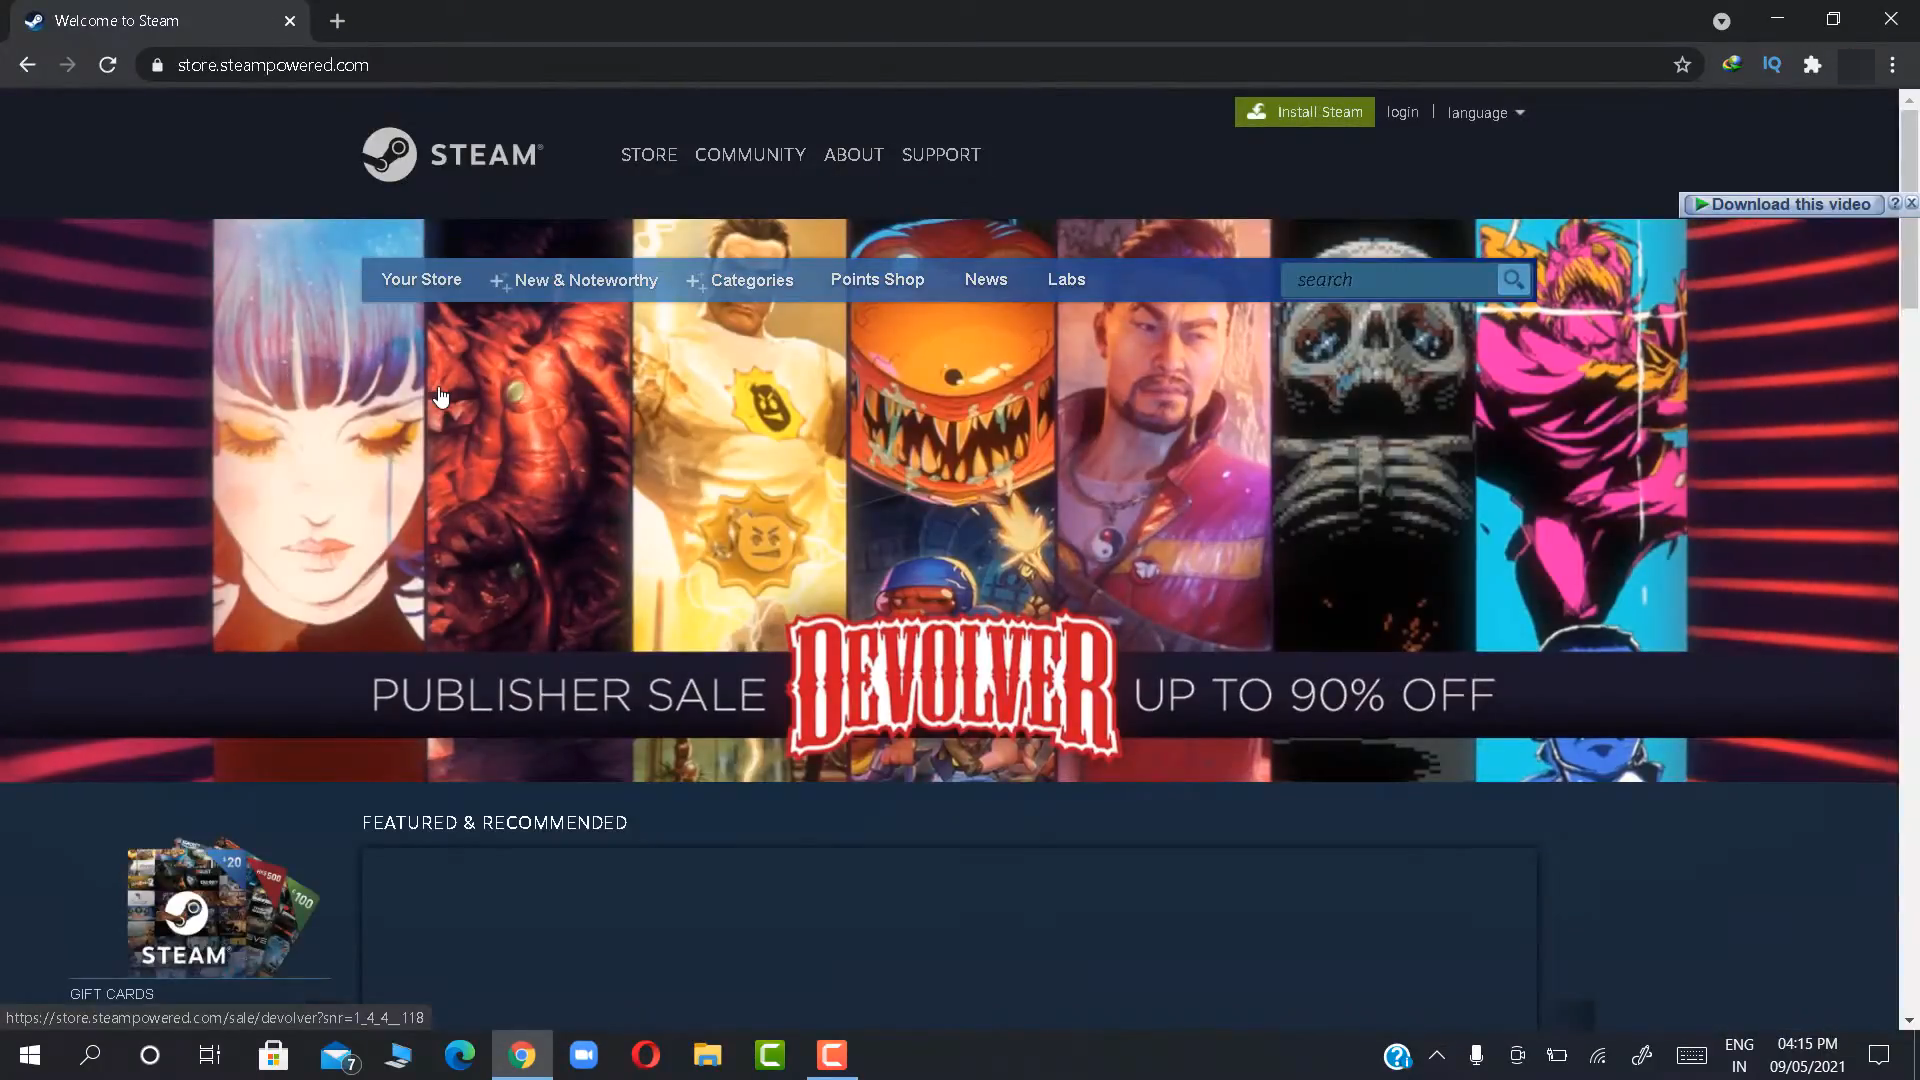 Then on the first link click Welcome to steam. You'll be directed to steam homepage.